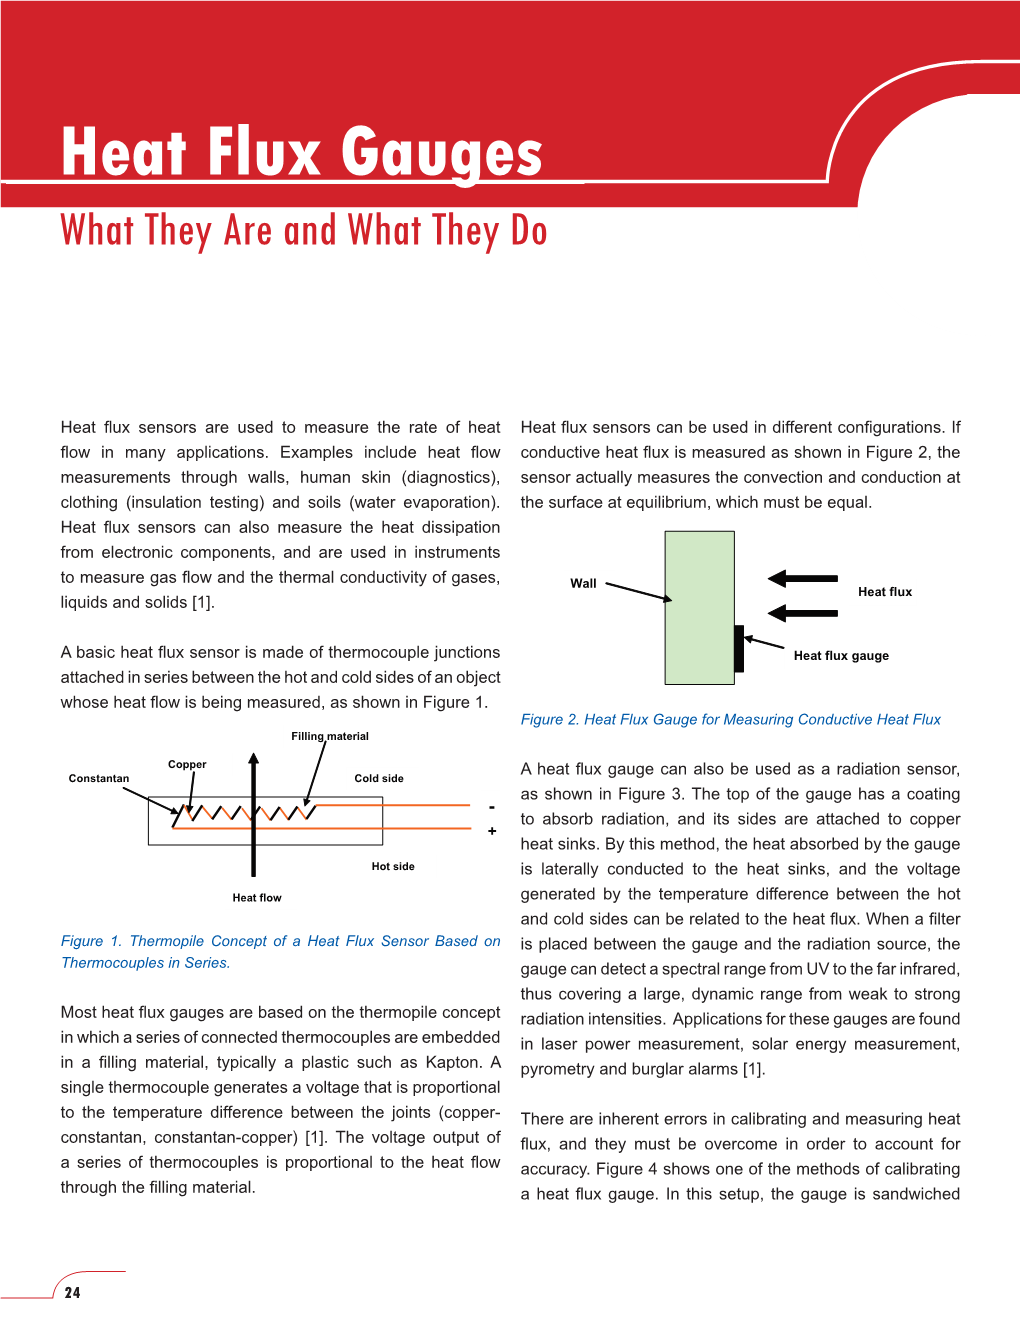 Heat Flux Gauges What They Are and What They Do